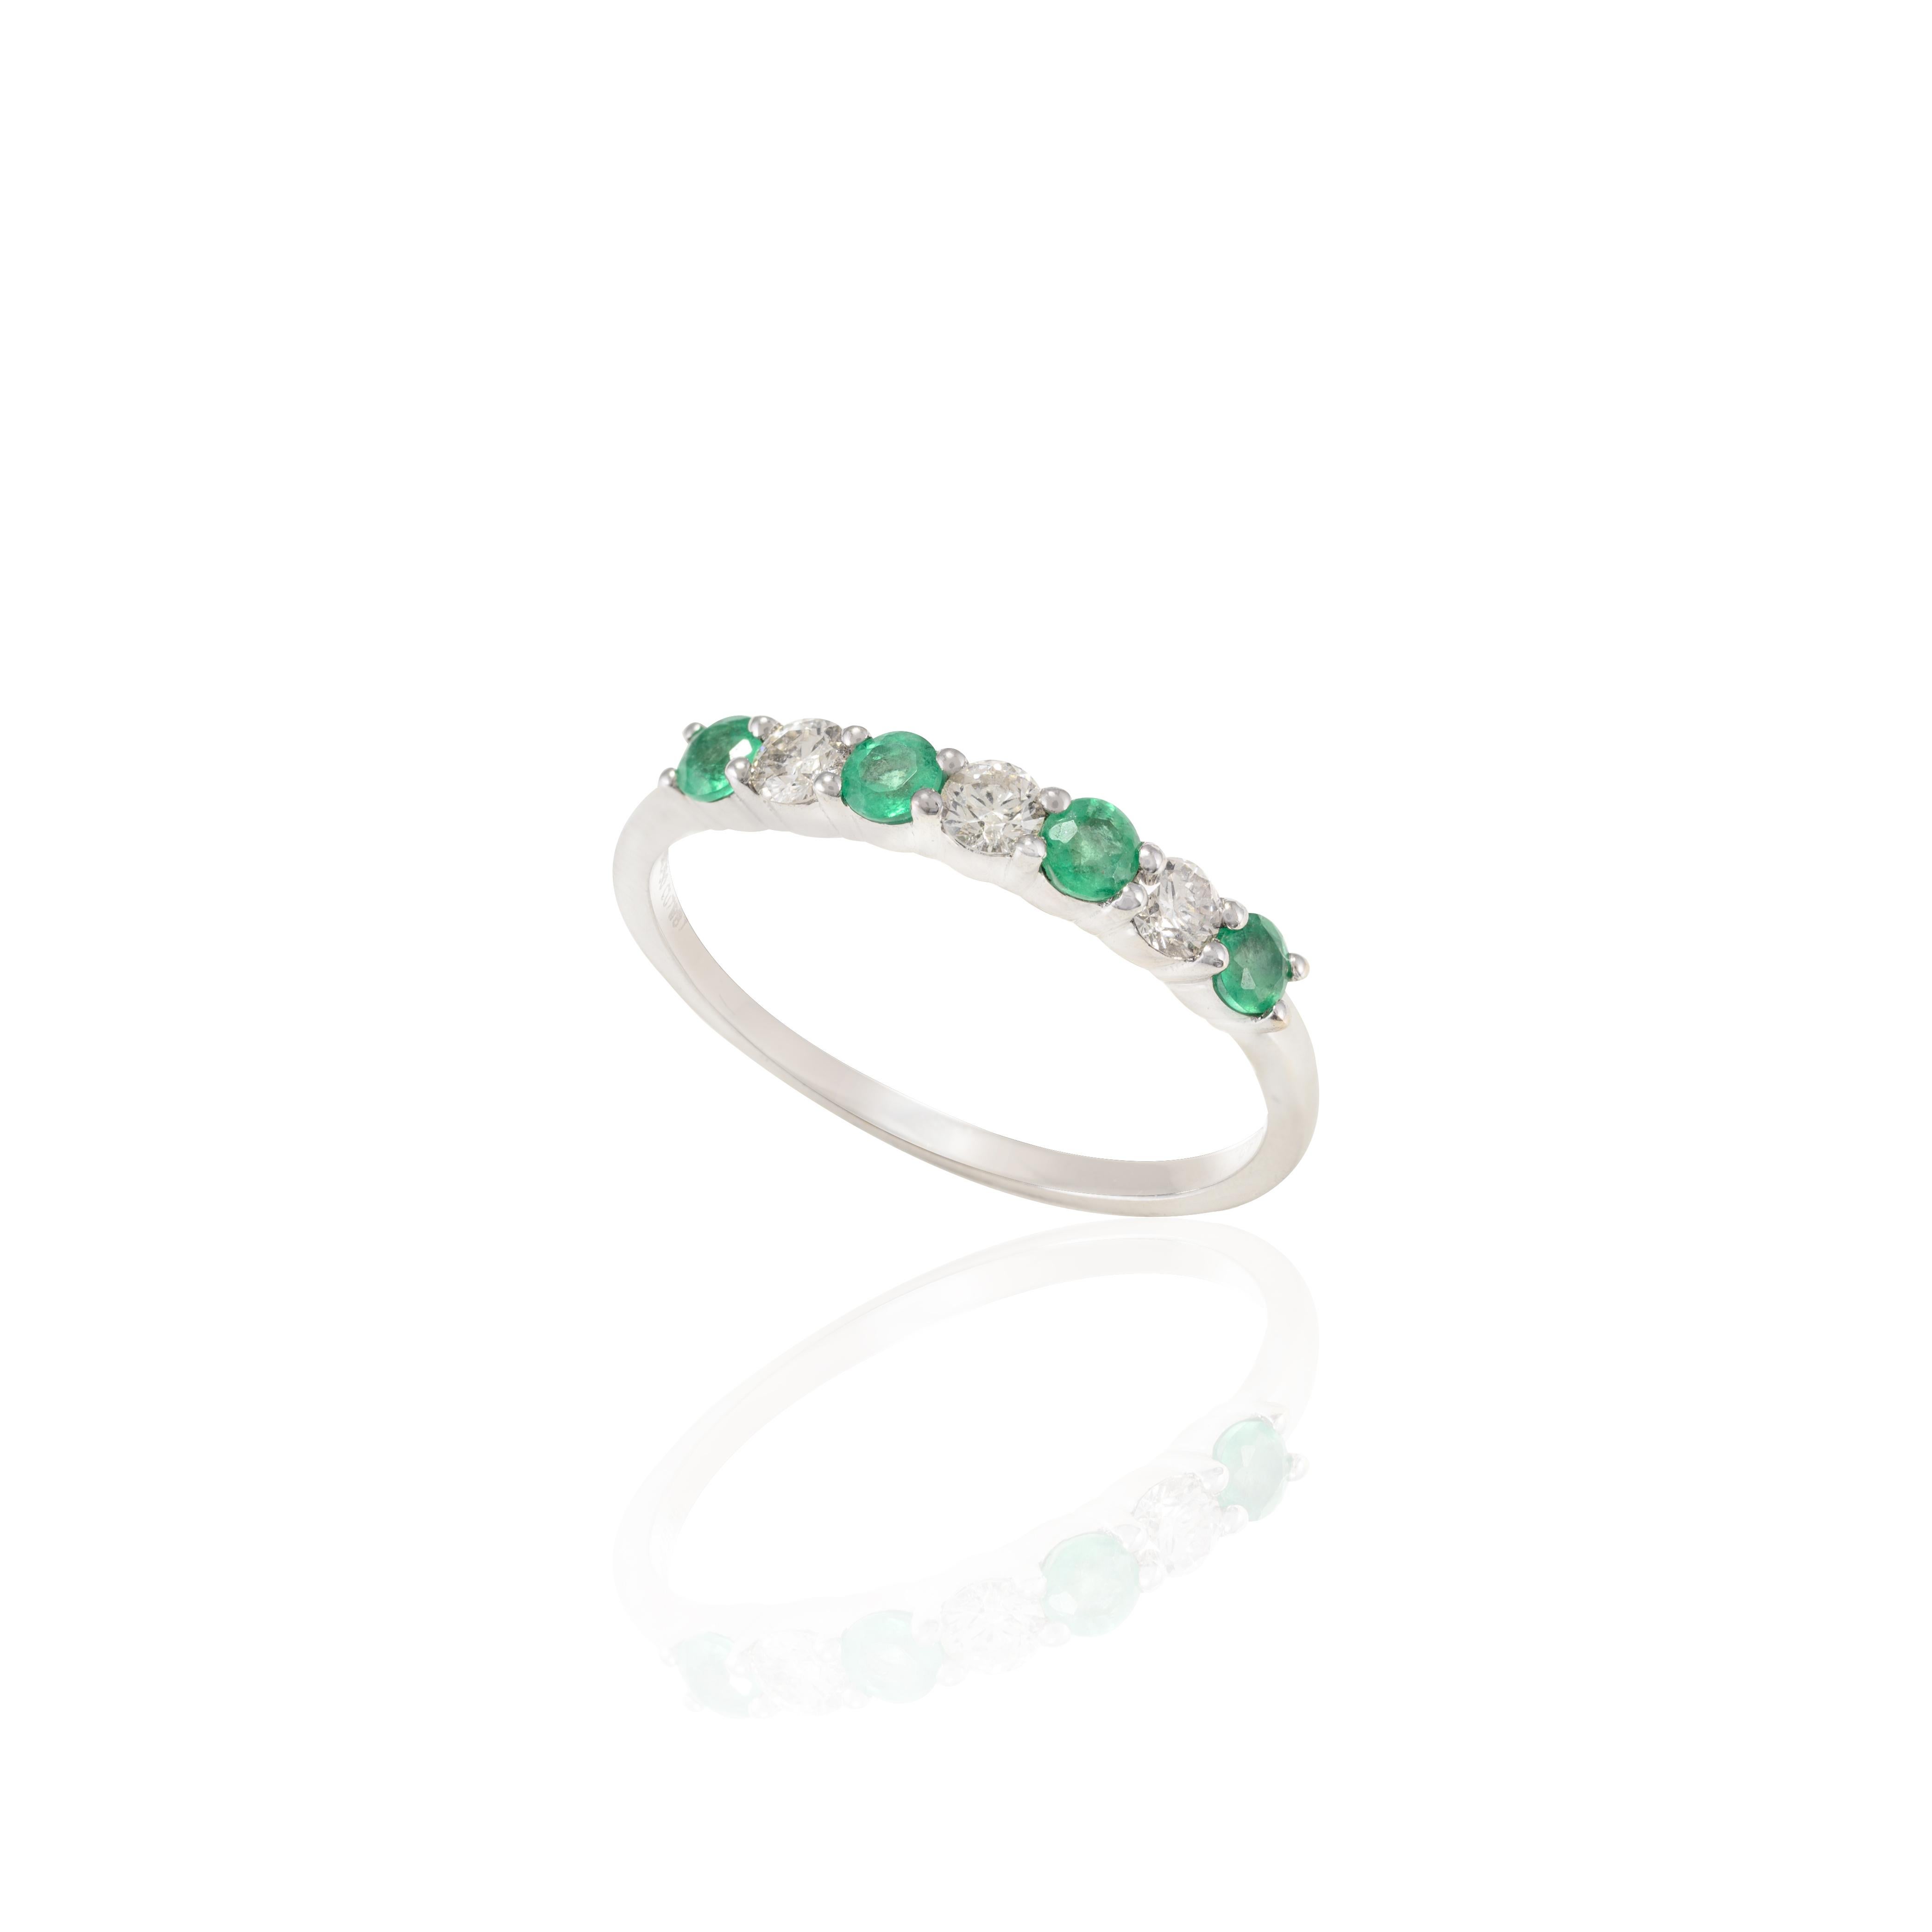 For Sale:  Dainty Natural Emerald and Diamond Band Set in 18k Solid White Gold Setting 5